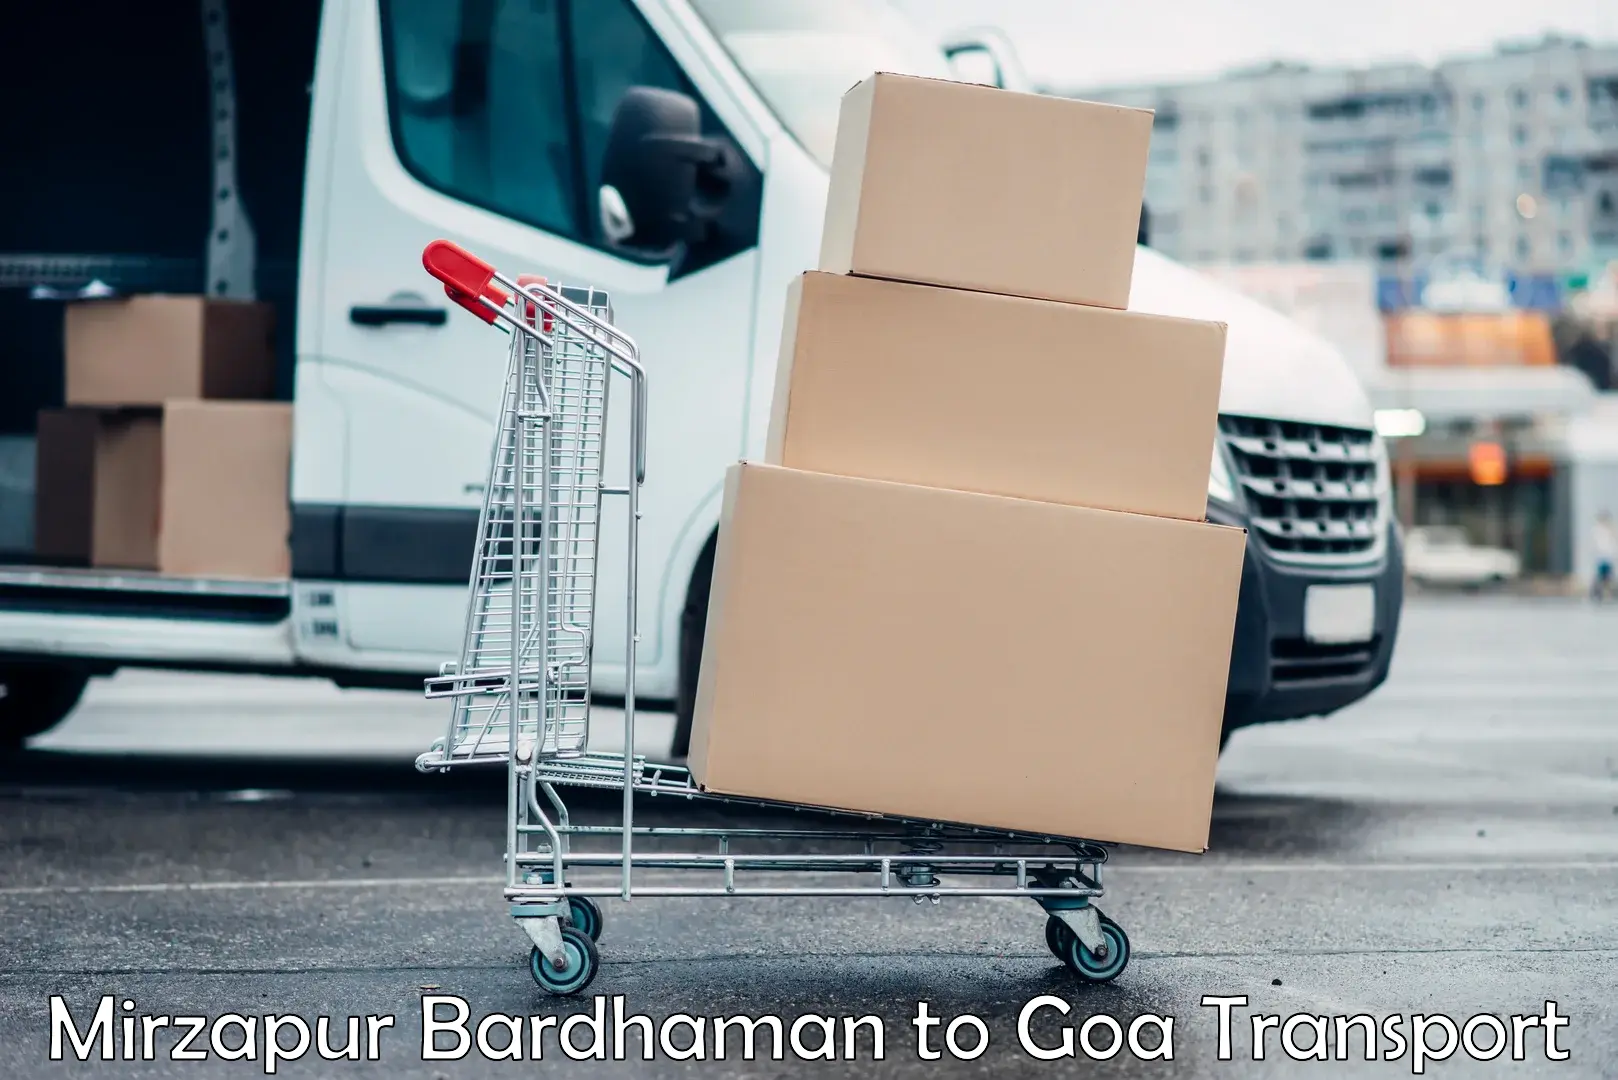 Domestic goods transportation services in Mirzapur Bardhaman to Goa